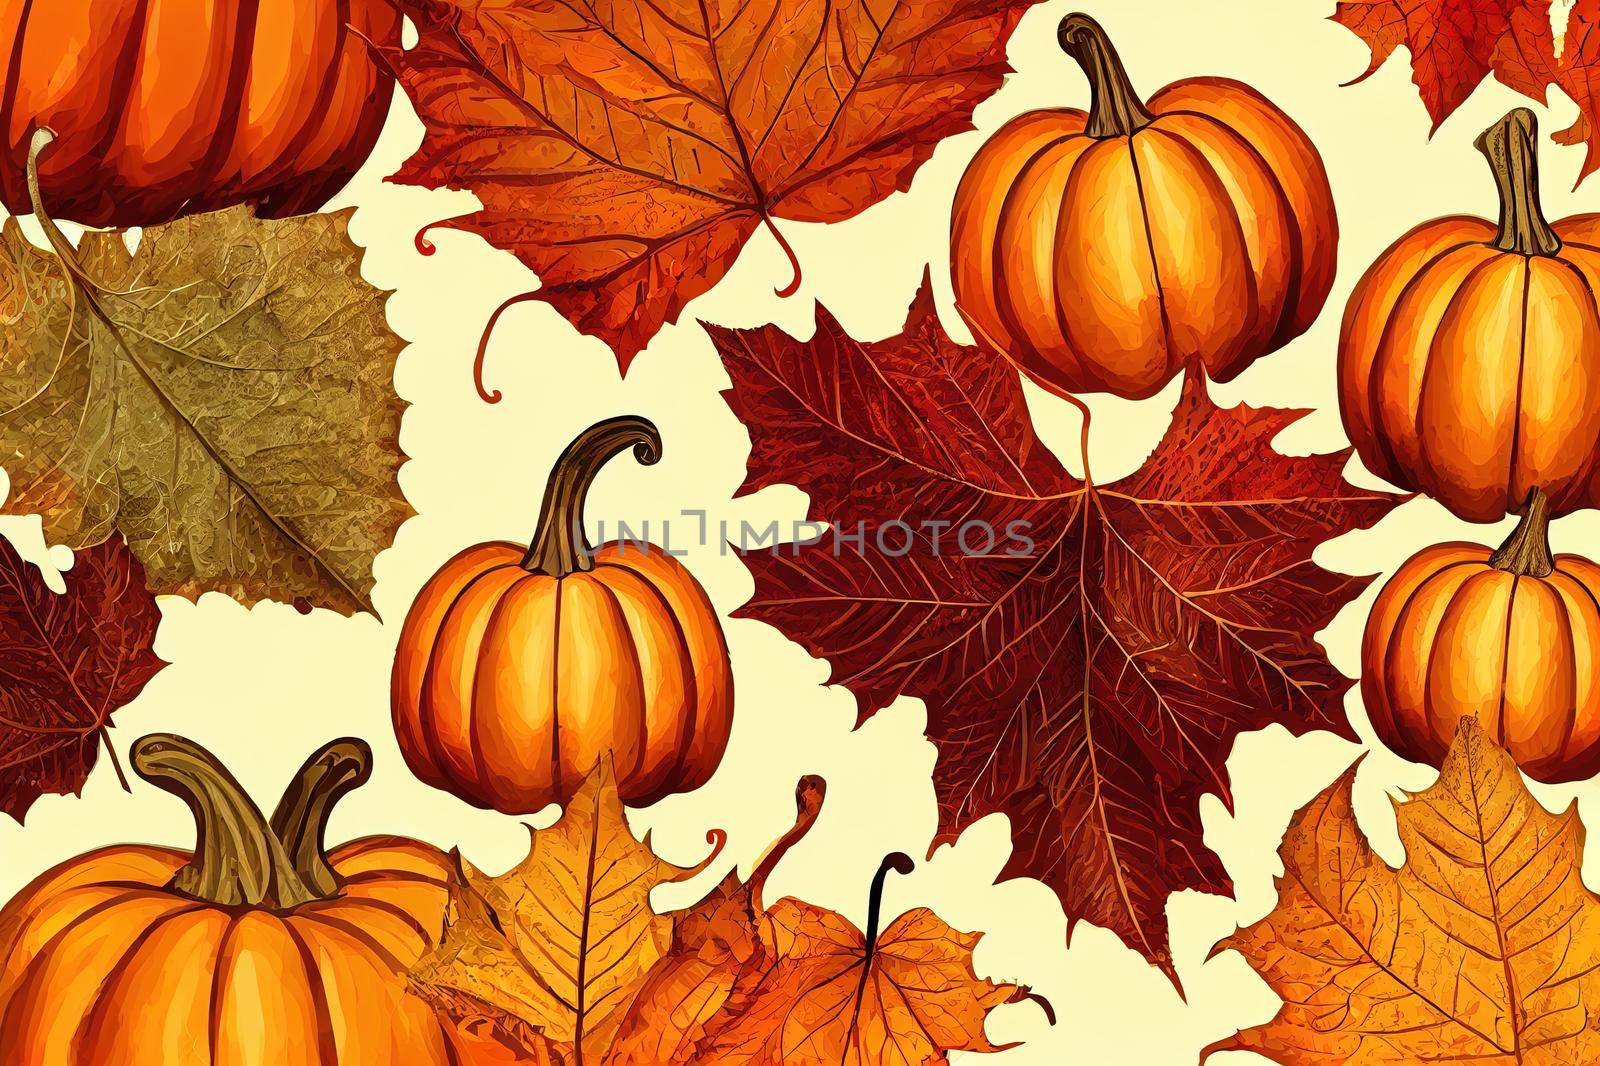 autumn illustration. several cute autumn pumpkins with curly roots by 2ragon